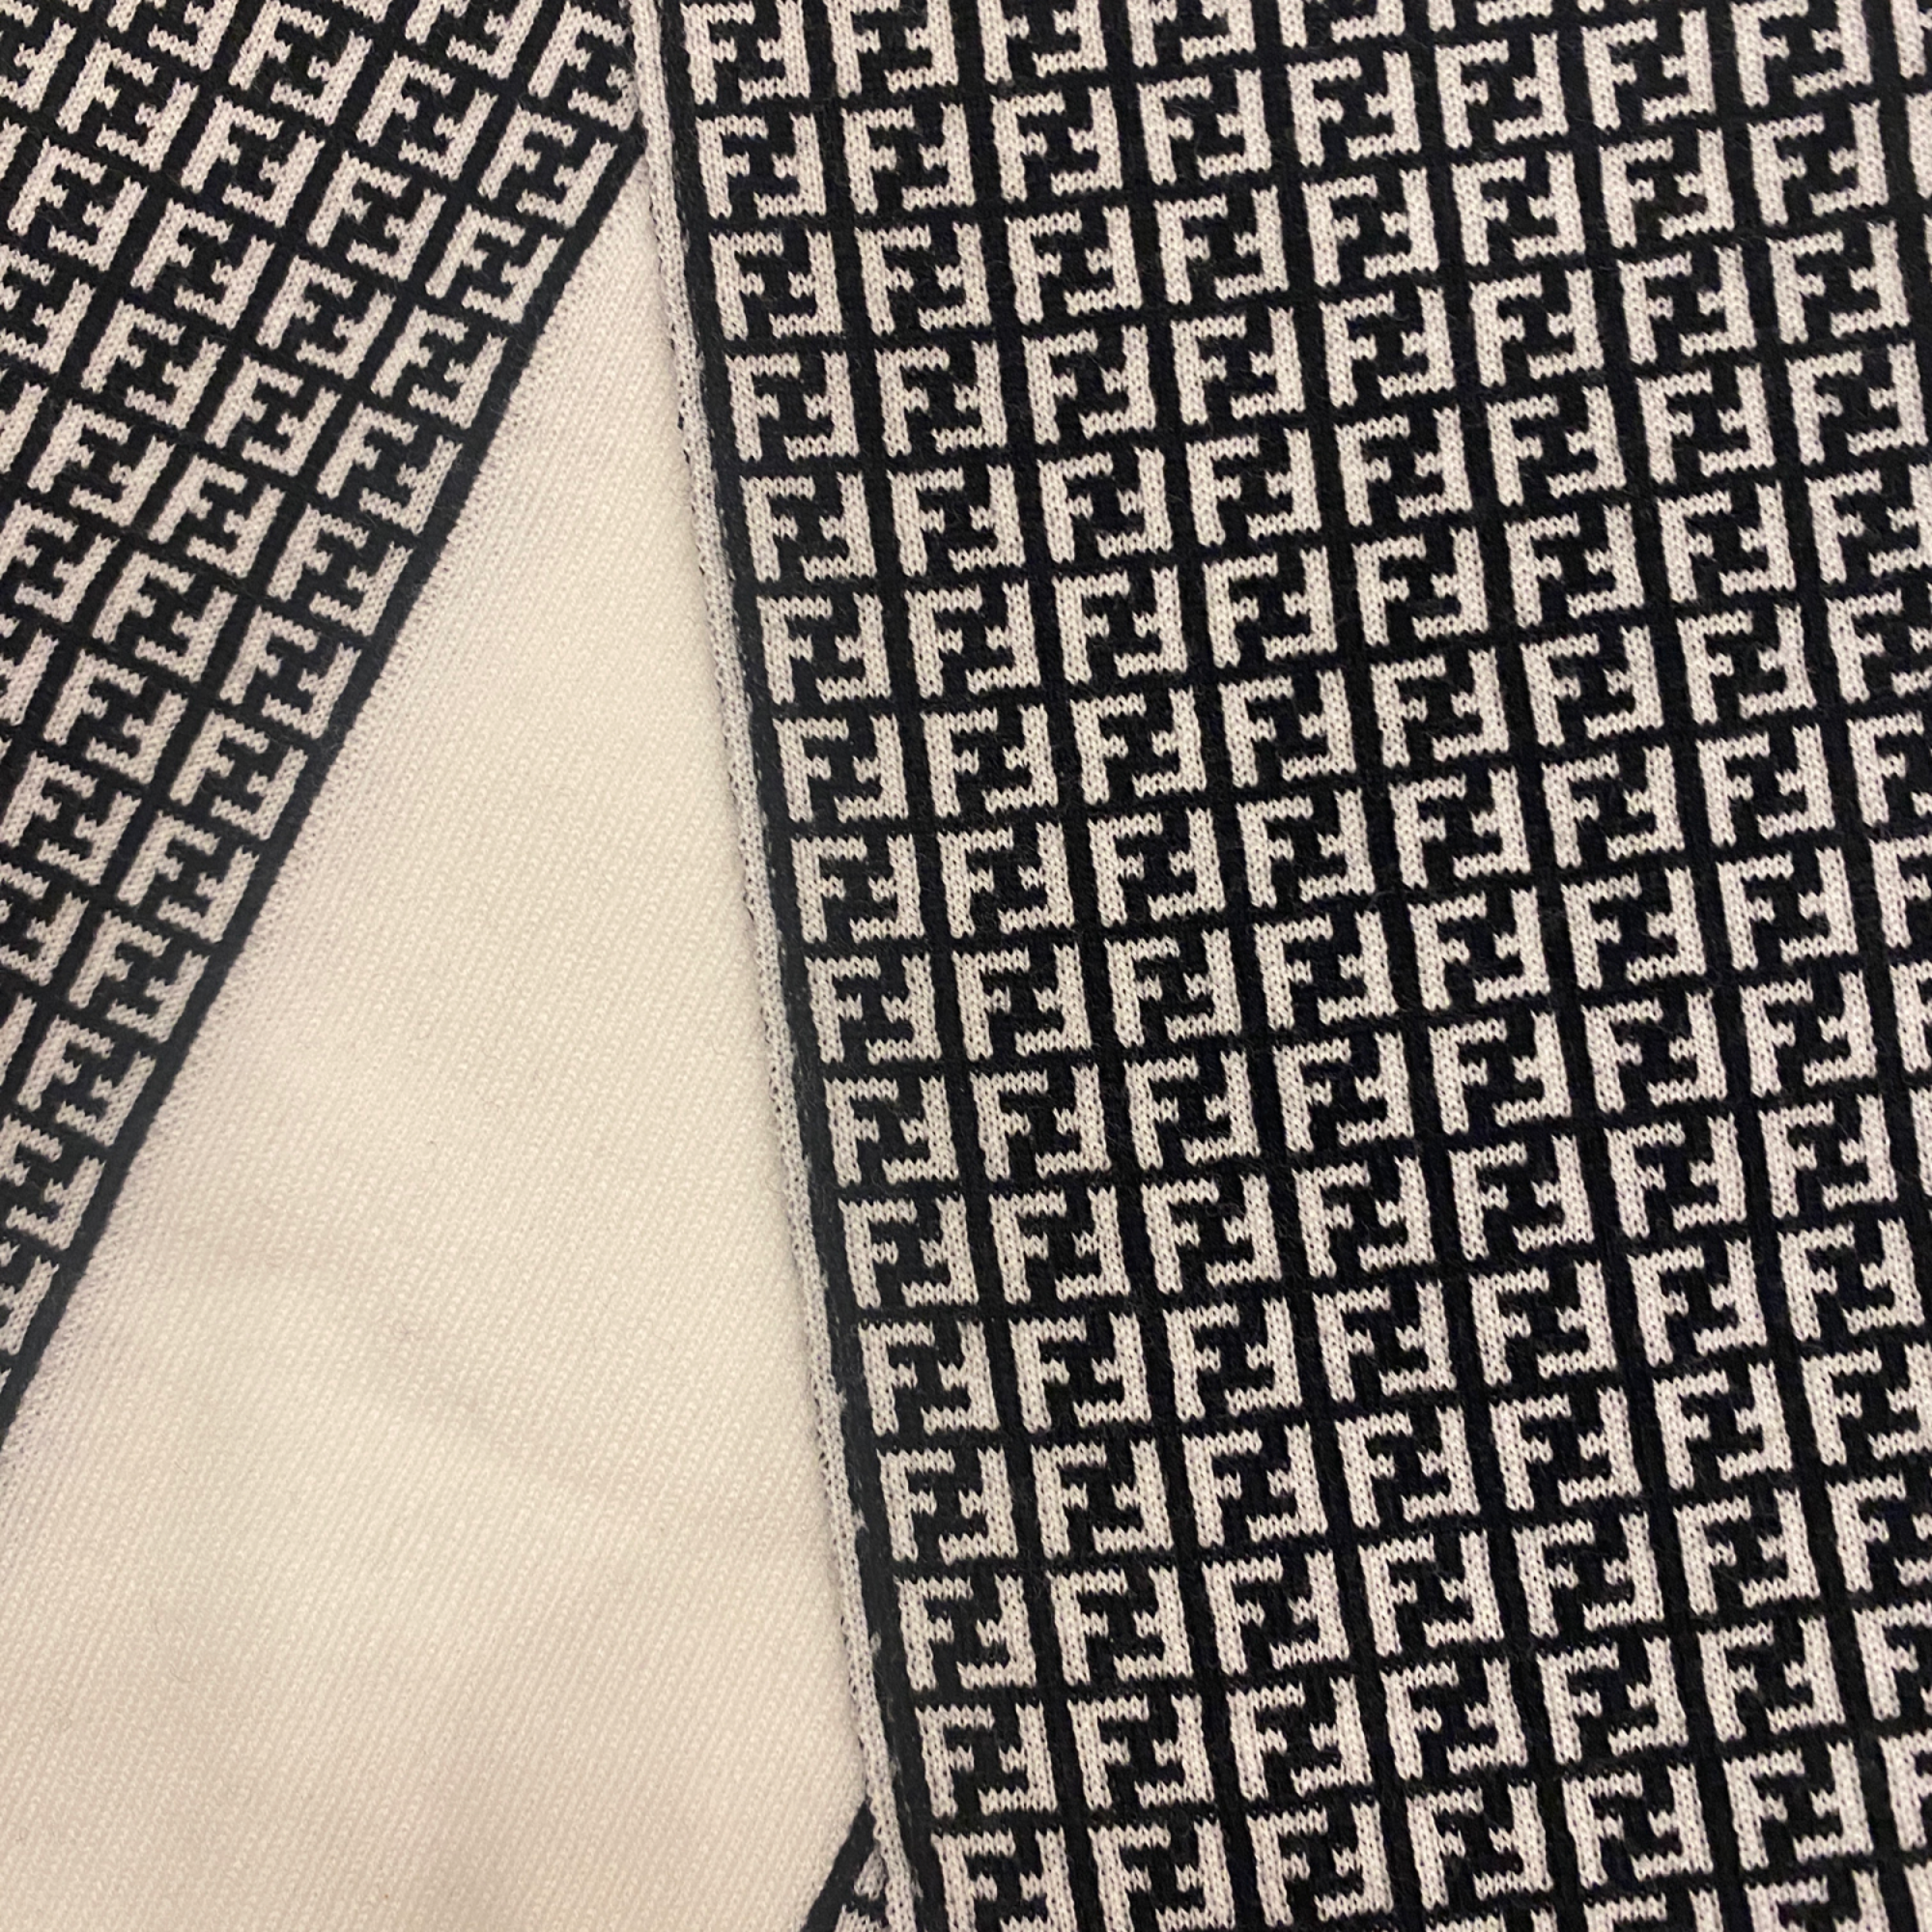 Fendi FF Print Nero and Bianco Knitted Wool Scarf FXQ056 at_Queen_Bee_of_Beverly_Hills